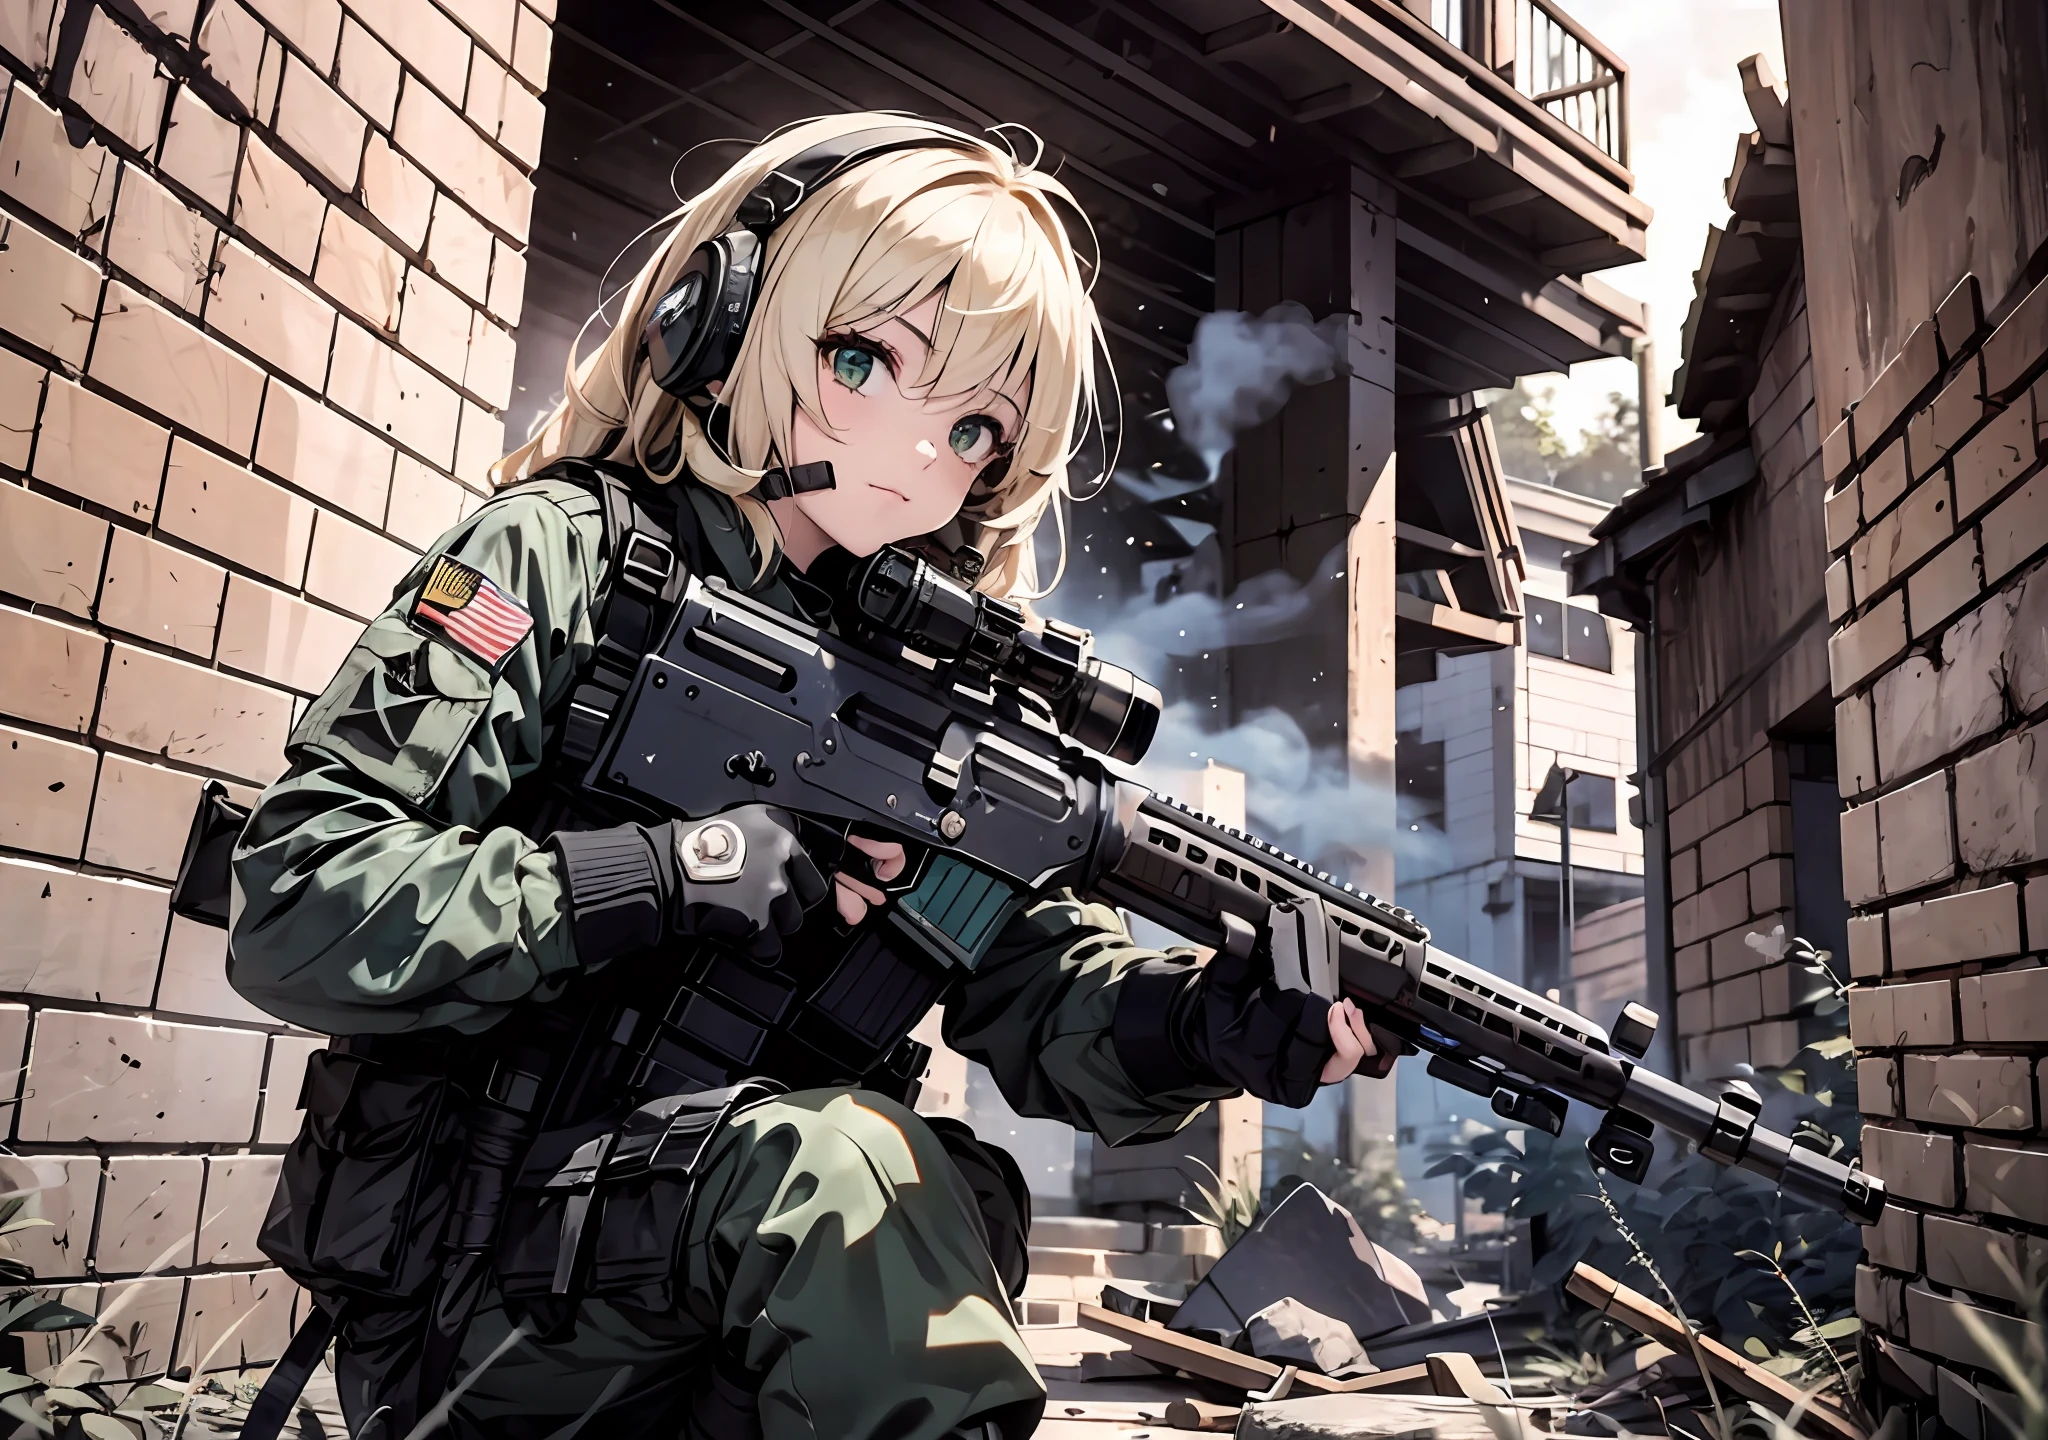 {{Masterpiece, top quality, highly detailed CG, unified 8k wallpaper, movie lighting, lens flare}}, 1 girl holding a rifle through the wall, wide view, thick body, long blonde hair that floats, green eyes, (holding a weapon, holding a rifle, aiming, aiming: 1.4), gun, h&k hk416, carbine, open fire, rubble, ruins of conflict areas, plumes, nitric smoke, blast waves, Flying bullets, fellow soldiers, sniper, 35mm, f/1.8